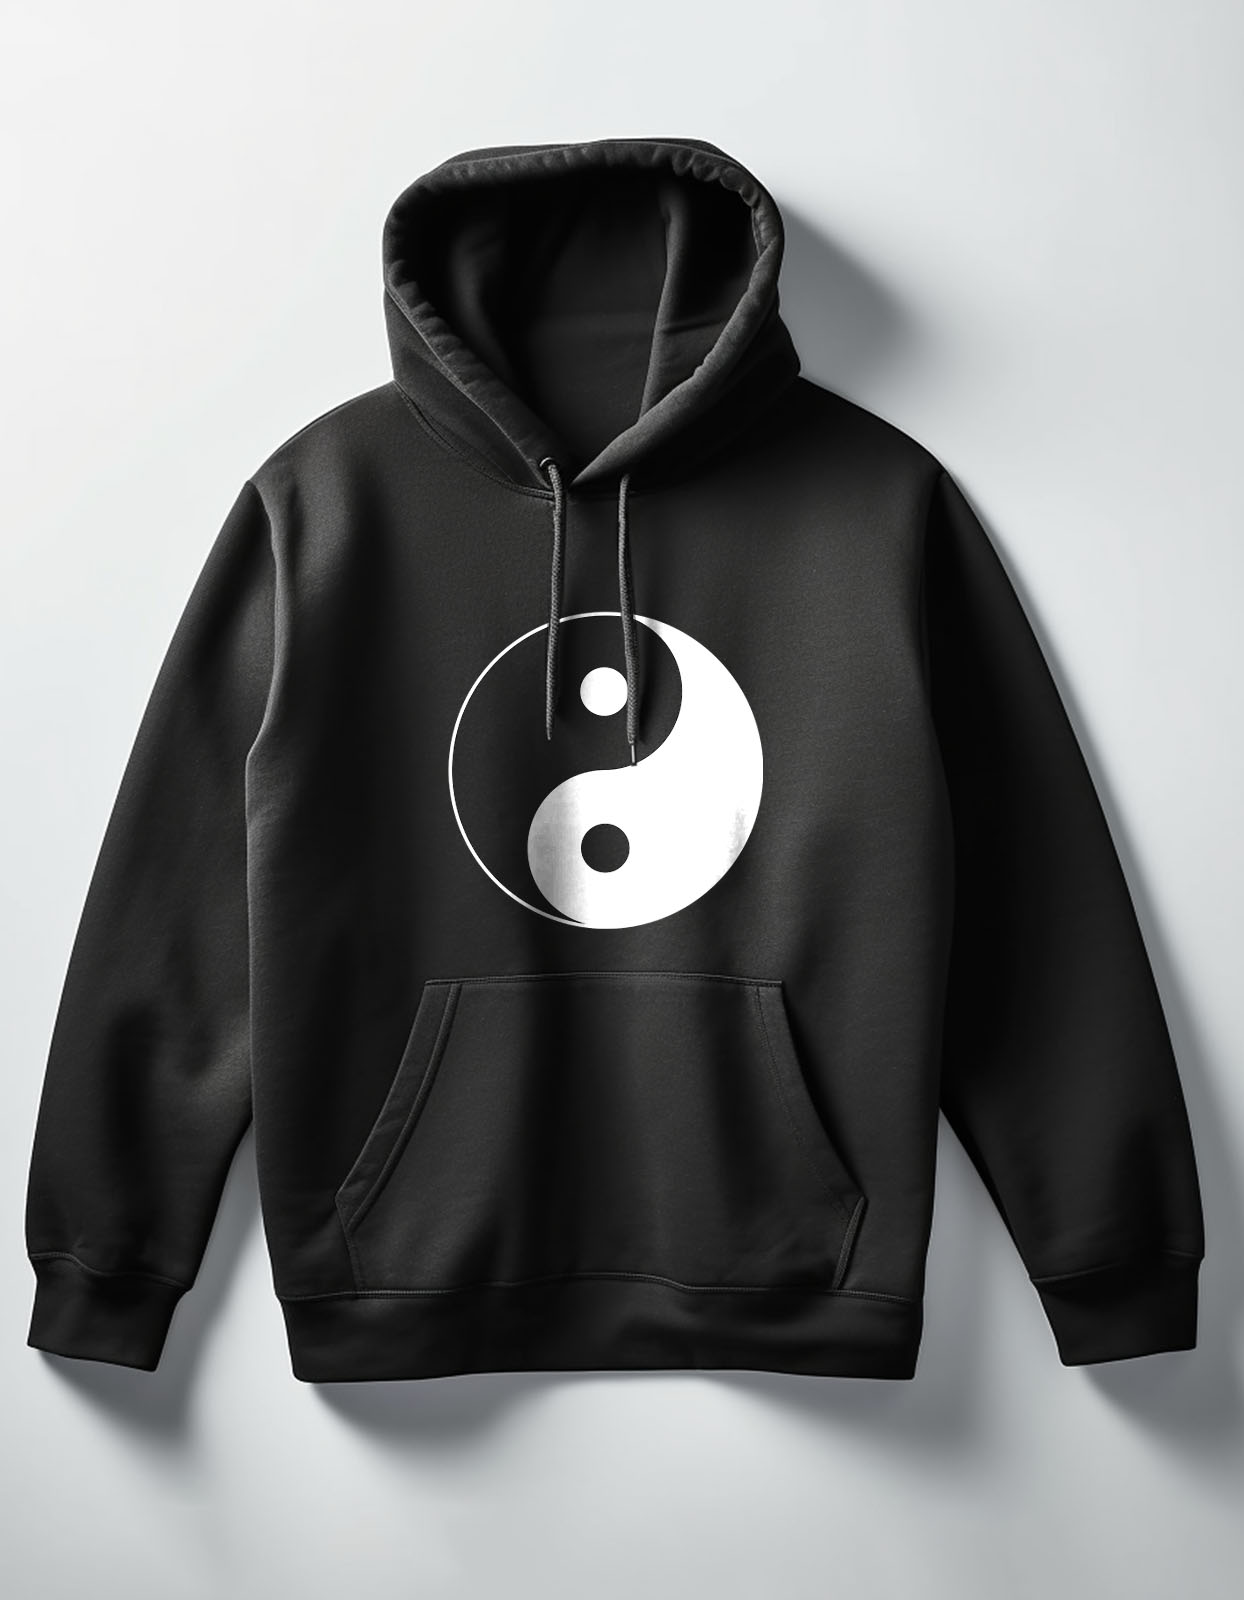 Yin and Yang Hoodie Unisex Online in India